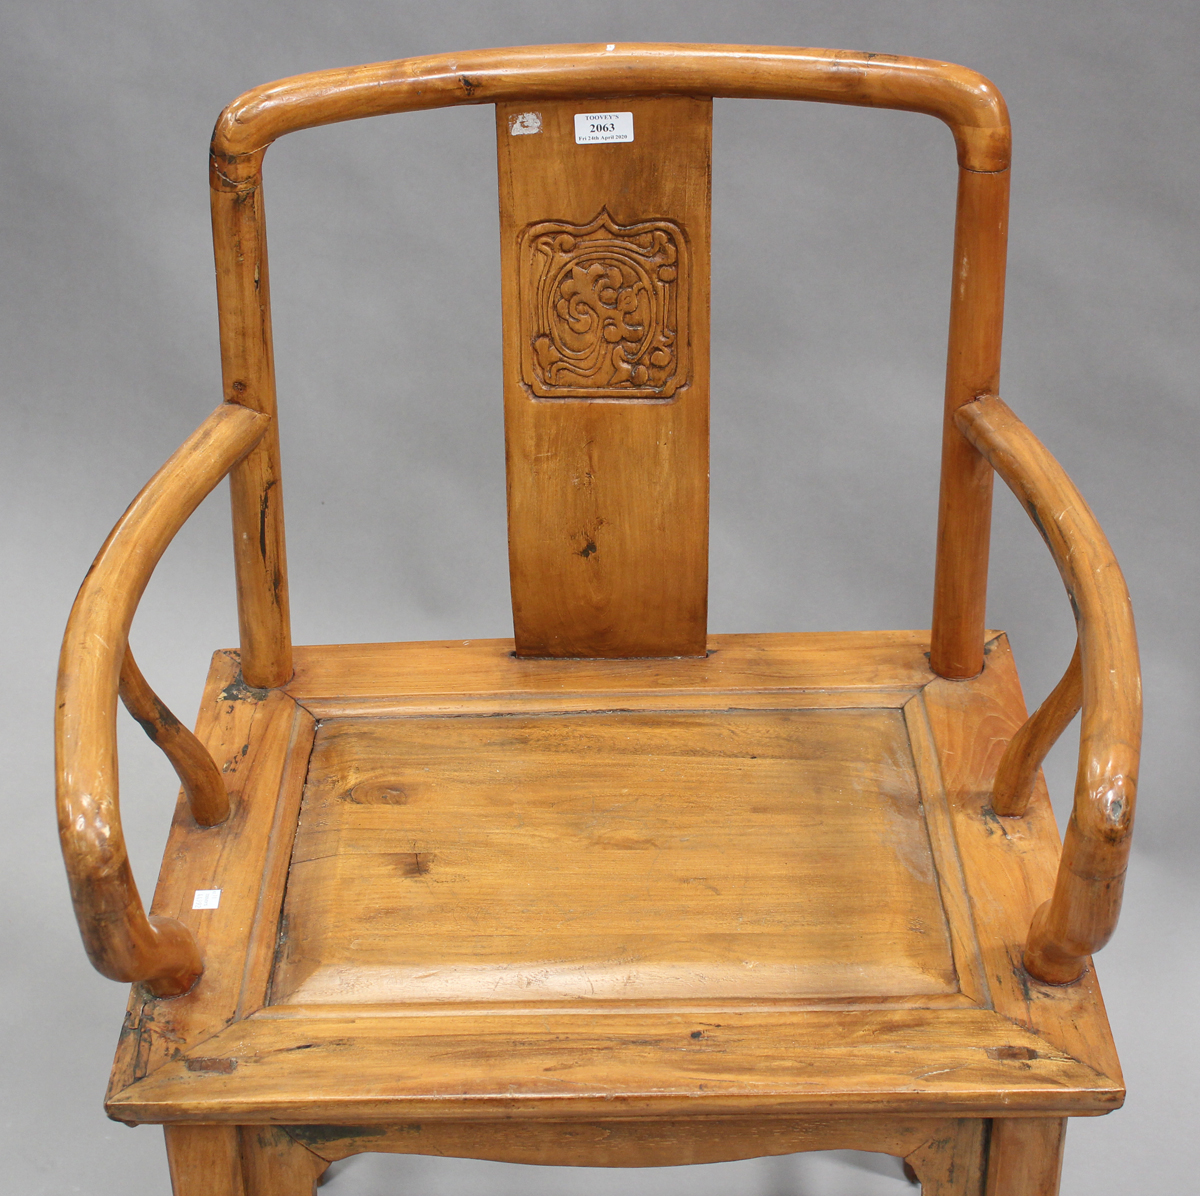 A 20th century Chinese softwood elbow chair with a carved splat back and panelled seat, on block - Image 2 of 2